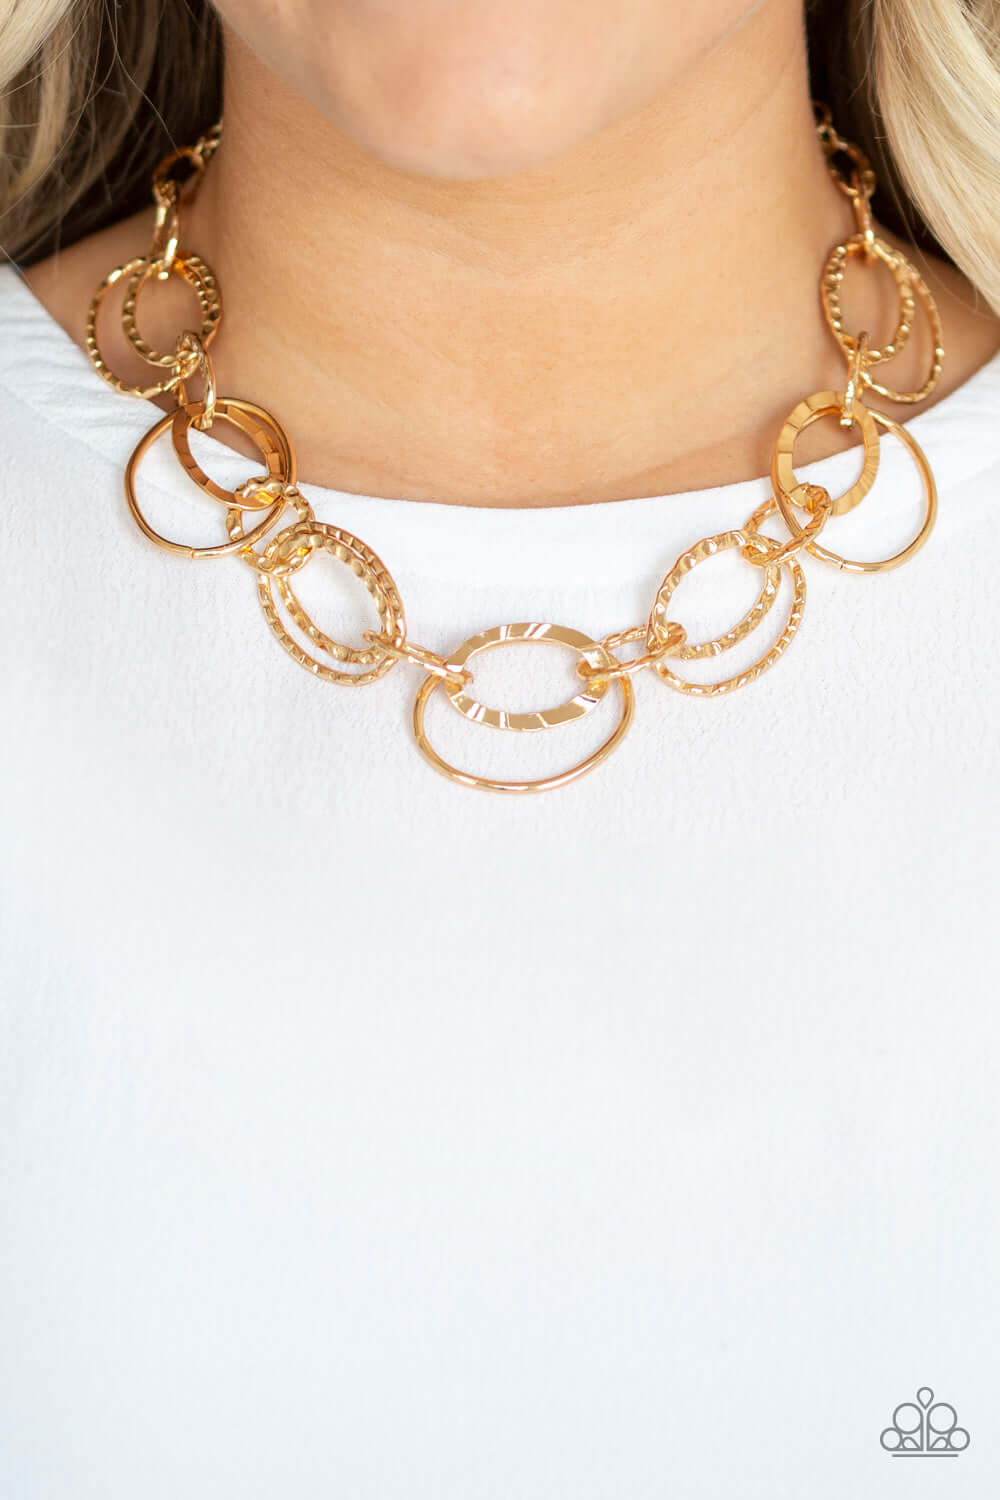 Bend OVAL Backwards - Gold Necklace - TheMasterCollection